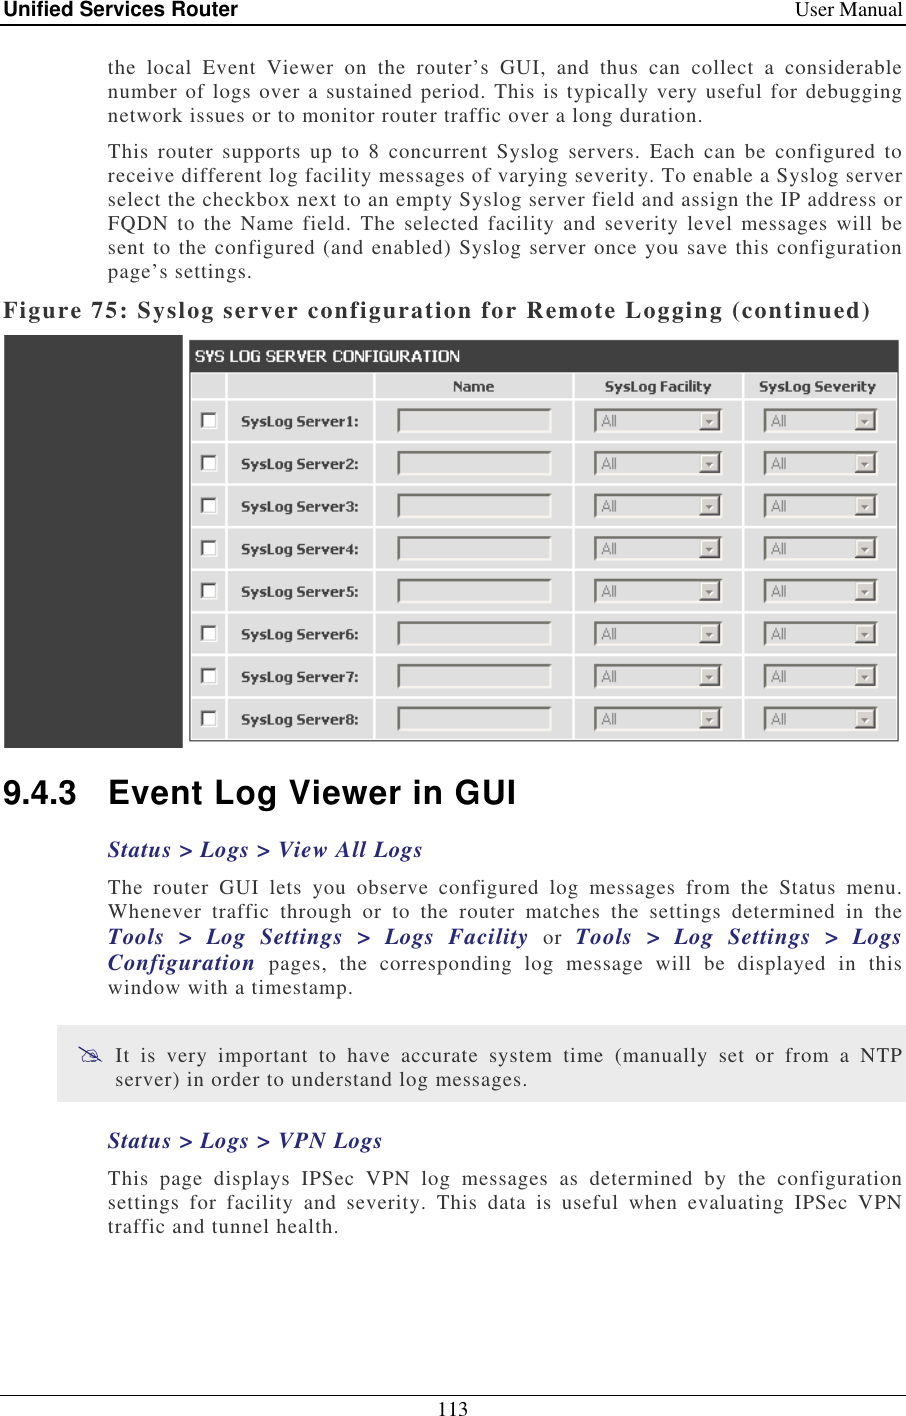 Unified Services Router    User Manual 113  the  local  Event  Viewer  on  the  router’s  GUI,  and  thus  can  collect  a  considerable number of logs over a sustained period. This is typically very useful for debugging network issues or to monitor router traffic over a long duration.  This  router  supports  up  to  8  concurrent  Syslog  servers.  Each  can  be  configured  to receive different log facility messages of varying severity. To enable a Syslog server select the checkbox next to an empty Syslog server field and assign the IP address or FQDN  to  the Name  field.  The selected  facility  and severity  level  messages  will  be sent to the configured (and enabled) Syslog server once you save this configuration page’s settings.  Figure 75: Syslog server configuration for Remote Logging (continued)  9.4.3  Event Log Viewer in GUI Status &gt; Logs &gt; View All Logs The  router  GUI  lets  you  observe  configured  log  messages  from  the  Status  menu. Whenever  traffic  through  or  to  the  router  matches  the  settings  determined  in  the Tools  &gt;  Log  Settings  &gt;  Logs  Facility  or  Tools  &gt;  Log  Settings  &gt;  Logs Configuration  pages,  the  corresponding  log  message  will  be  displayed  in  this window with a timestamp.   It  is  very  important  to  have  accurate  system  time  (manually  set  or  from  a  NTP server) in order to understand log messages.  Status &gt; Logs &gt; VPN Logs This  page  displays  IPSec  VPN  log  messages  as  determined  by  the  configuration settings  for  facility  and  severity.  This  data  is  useful  when  evaluating  IPSec  VPN traffic and tunnel health.  